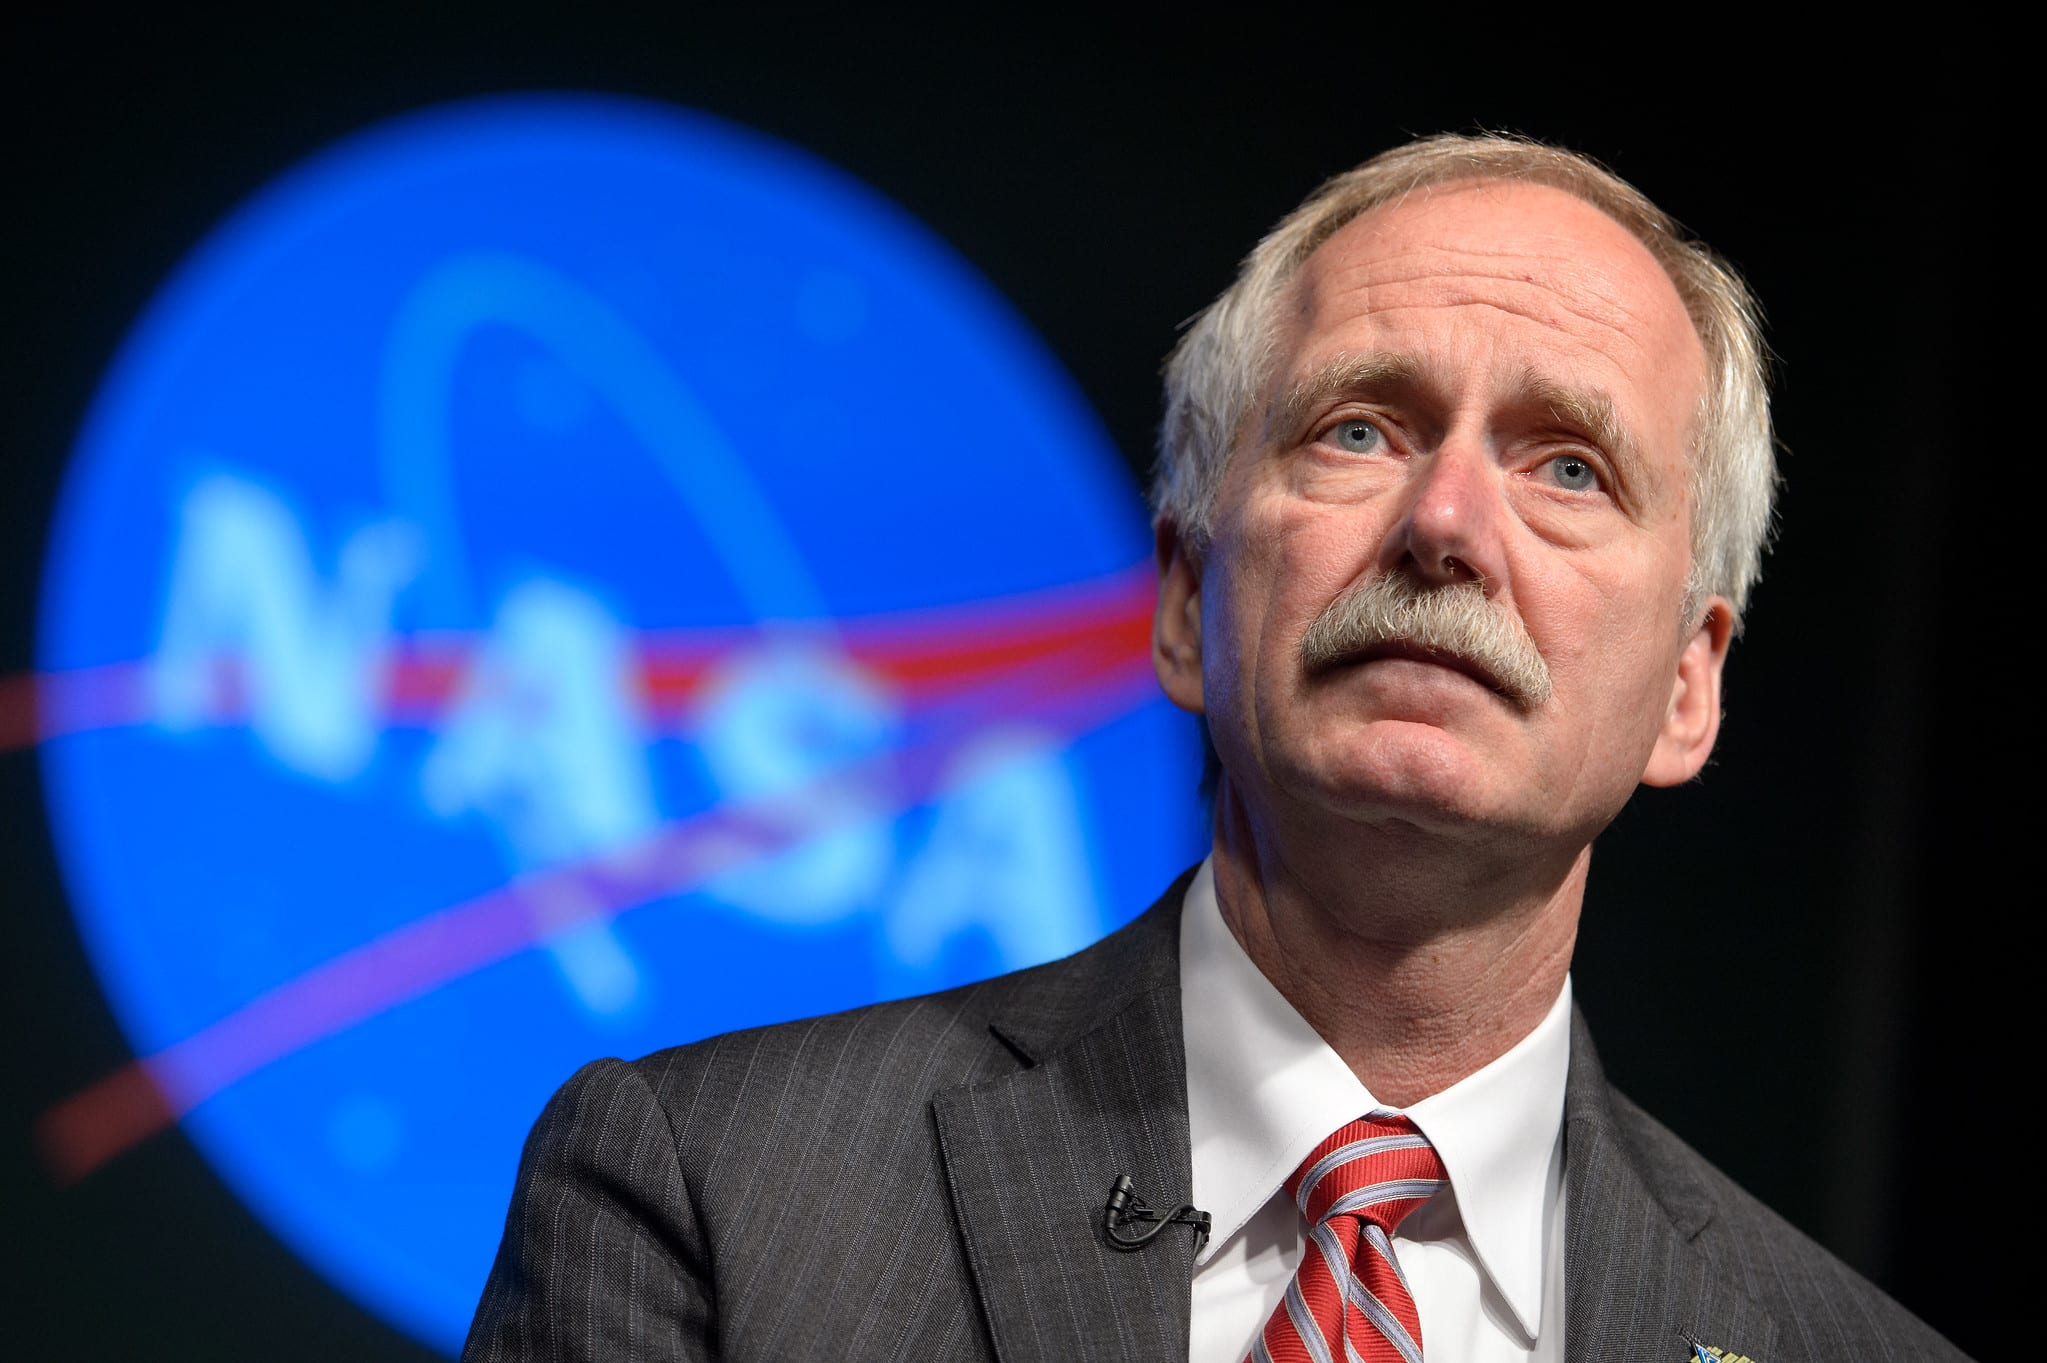 SpaceX hires former NASA official William Gerstenmaier